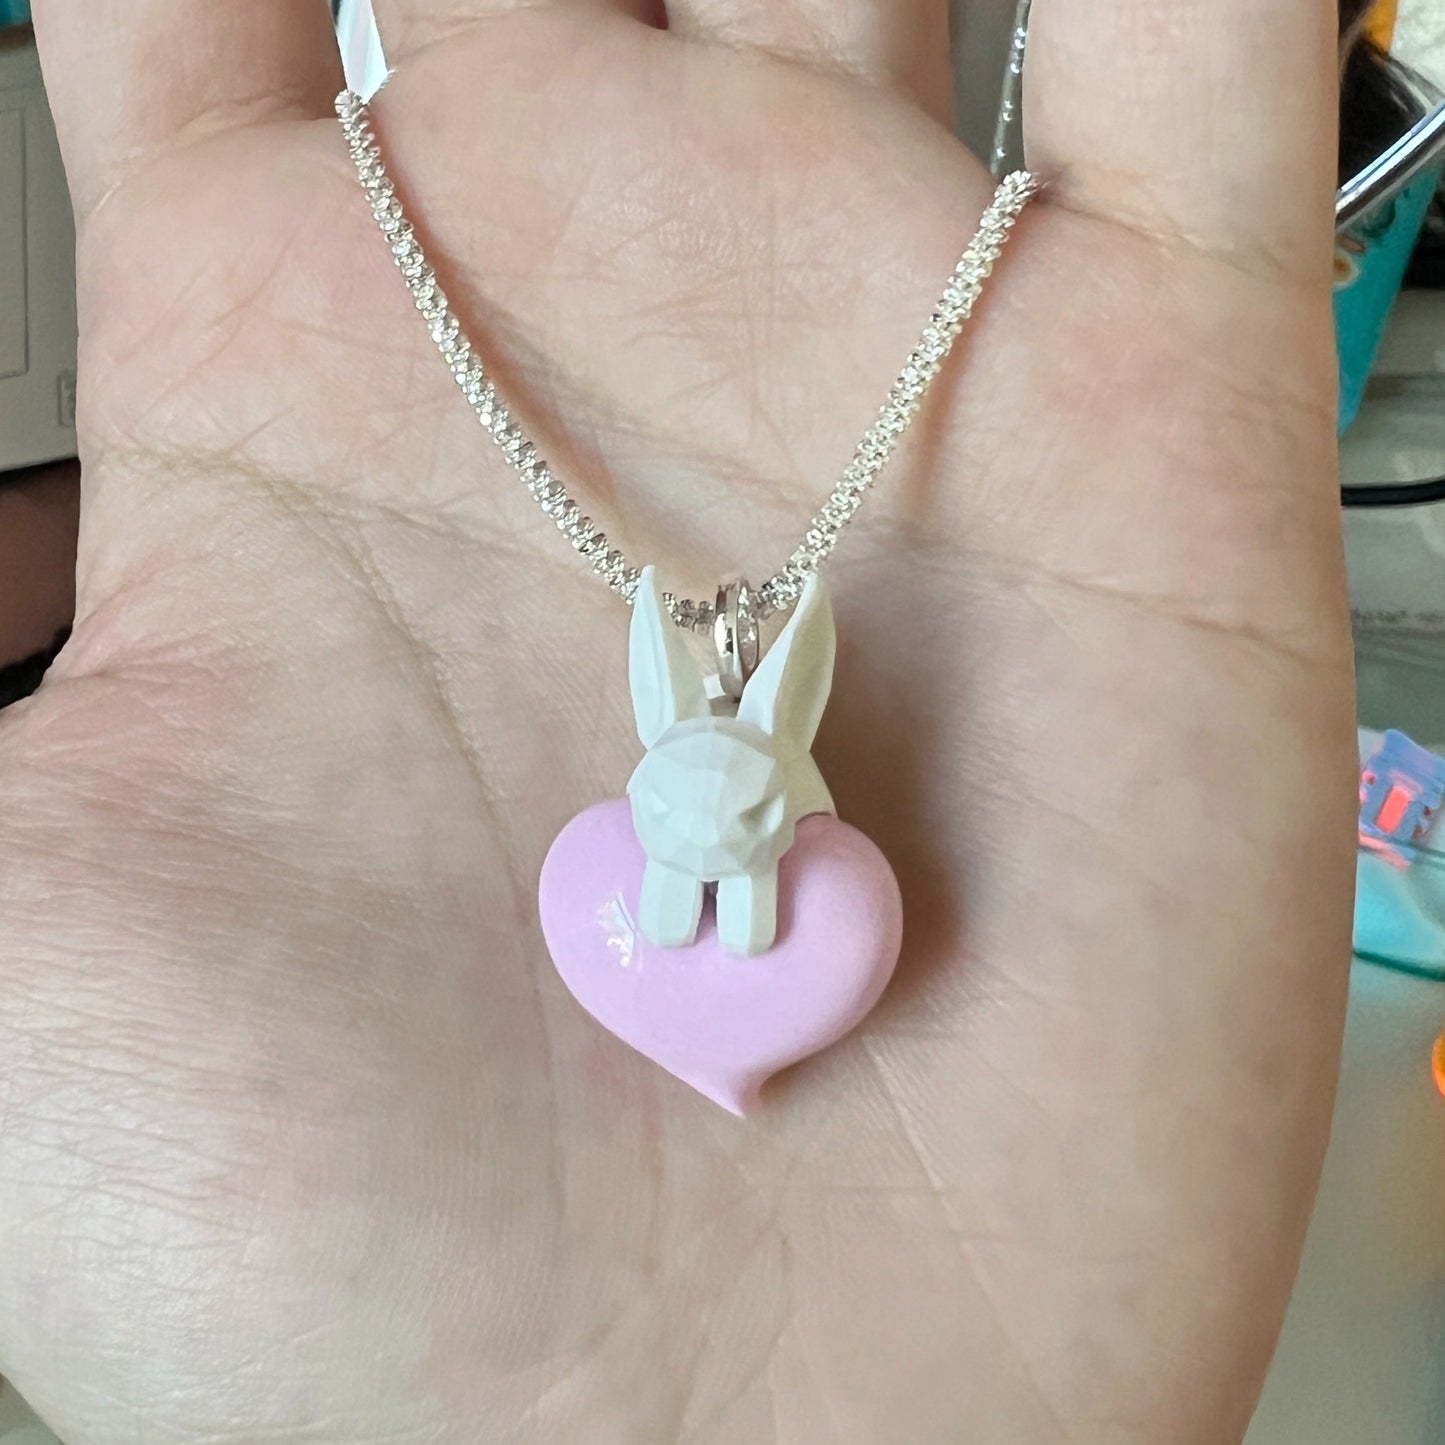 I love you rabbit necklace B1698